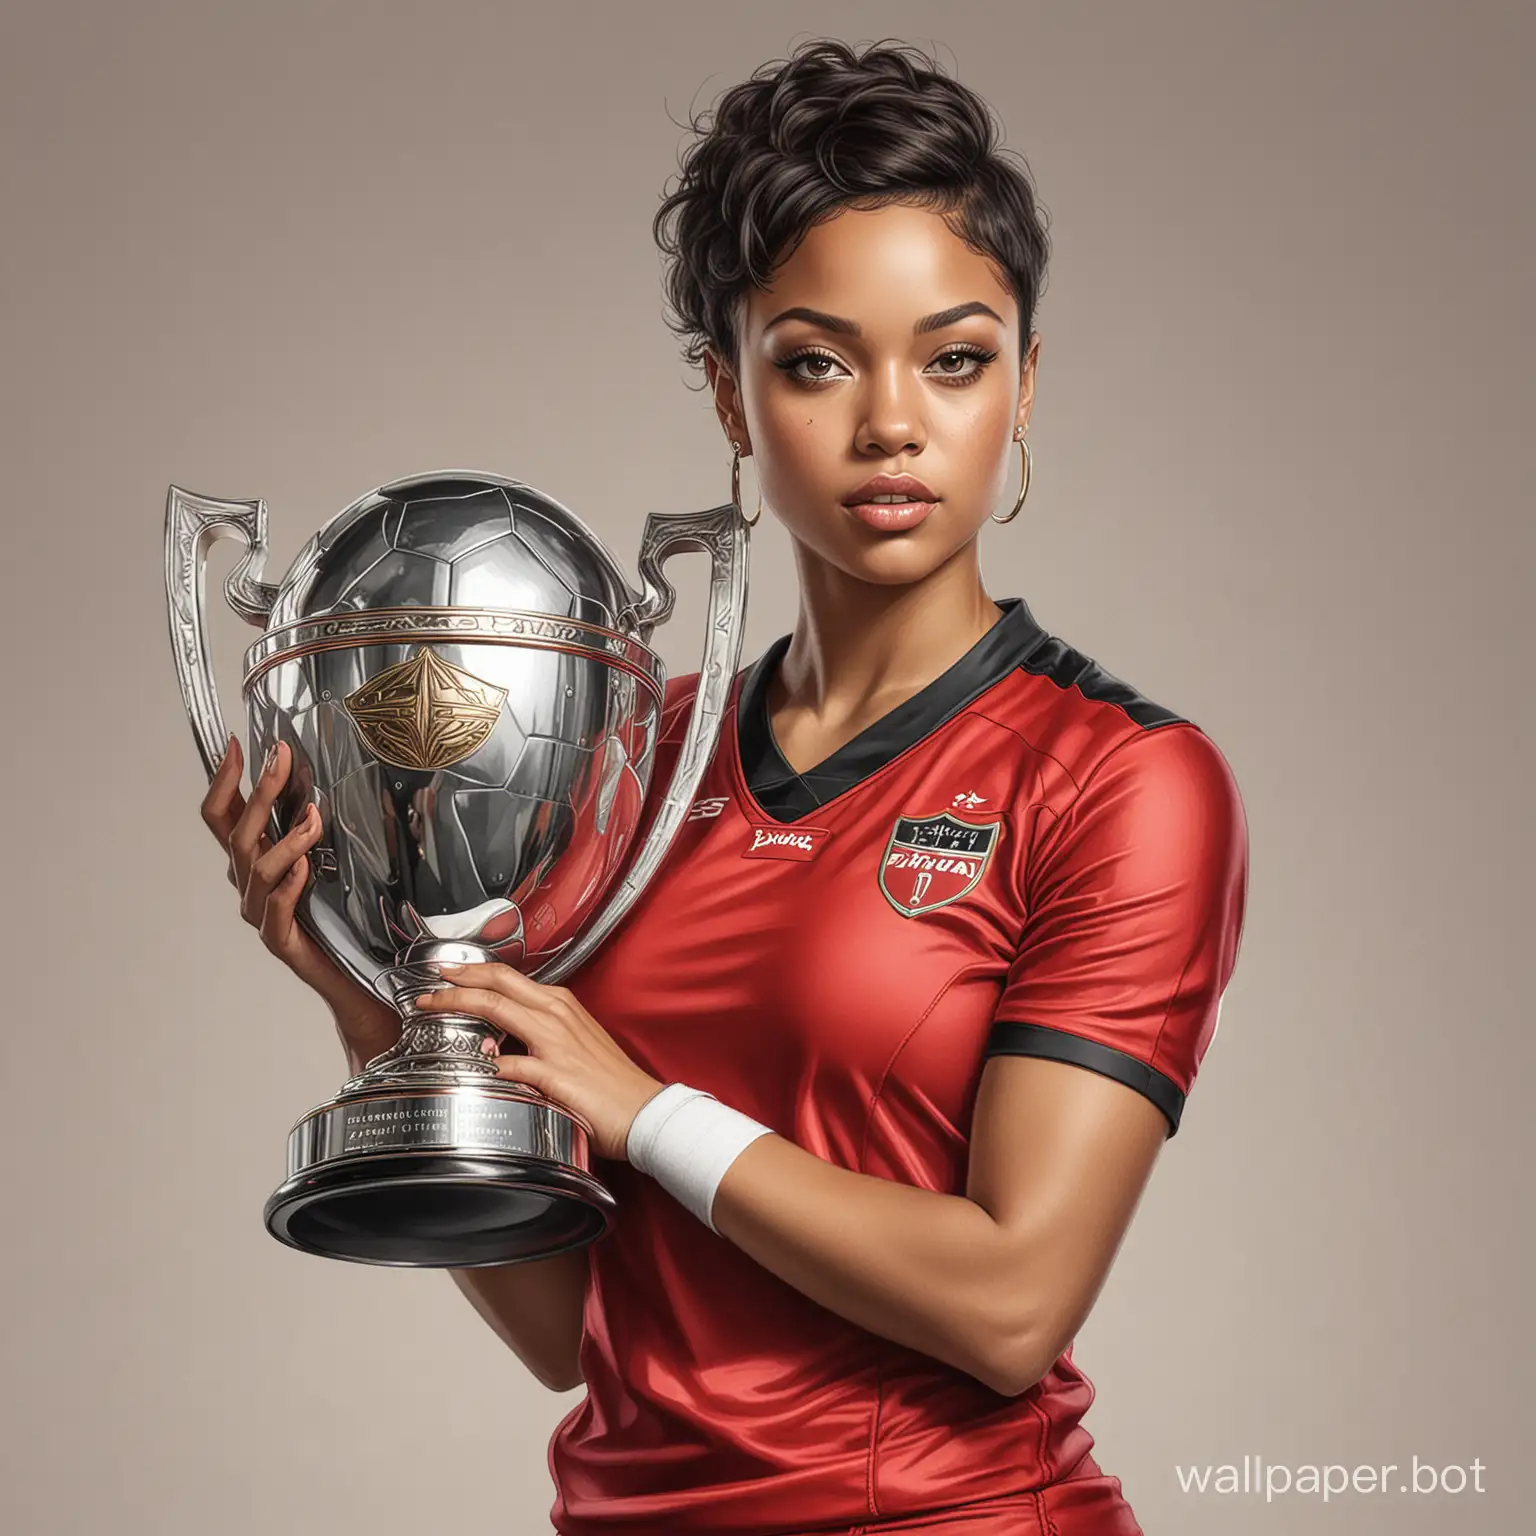 Realistic-Sketch-of-Mulatto-Woman-Celebrating-Football-Victory-with-Champions-Cup